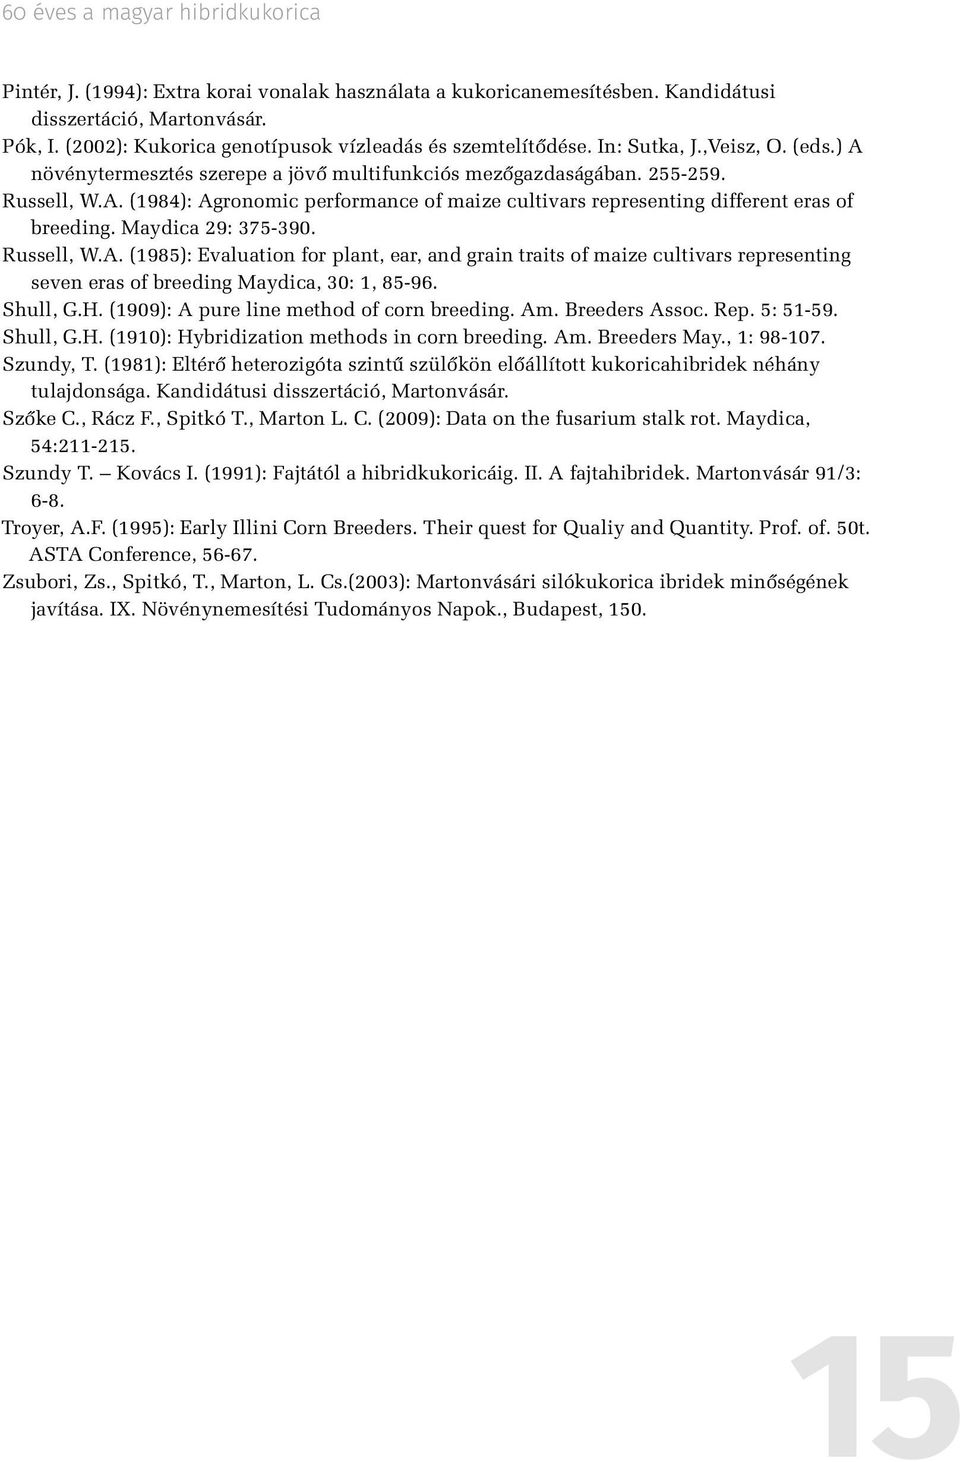 Maydica 29: 375-390. Russell, W.A. (1985): Evaluation for plant, ear, and grain traits of maize cultivars representing seven eras of breeding Maydica, 30: 1, 85-96. Shull, G.H.